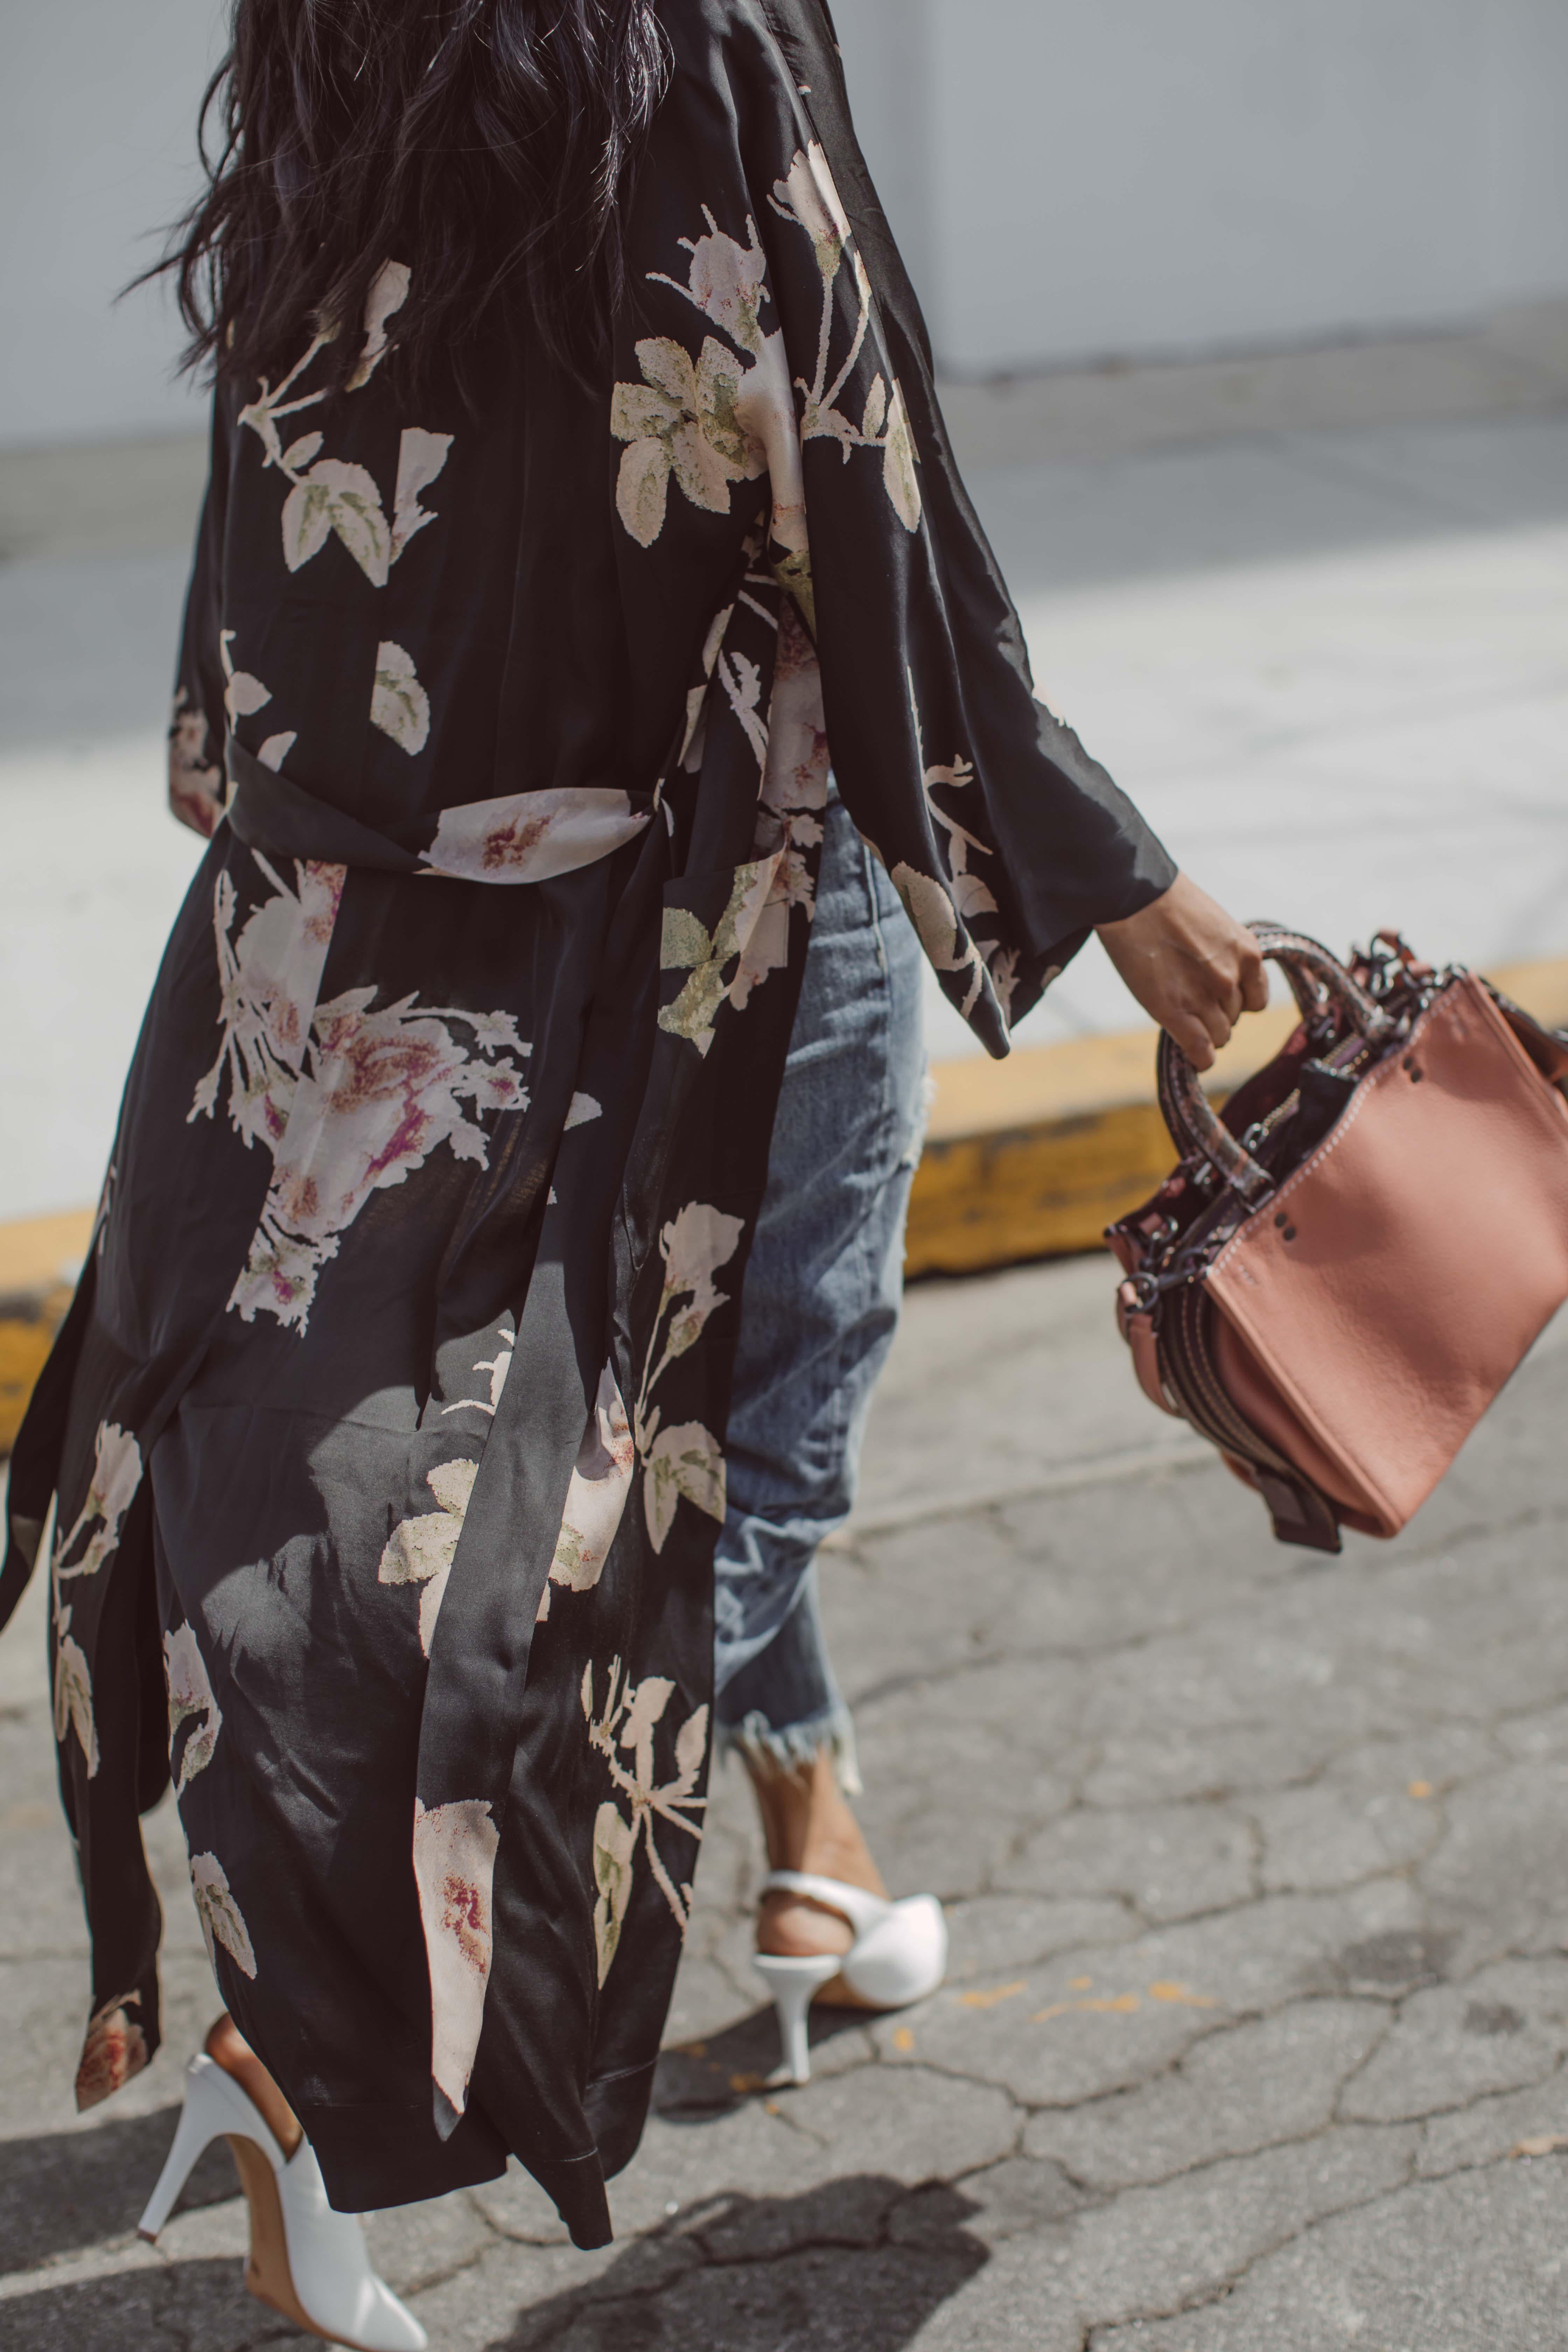 Walk In Wonderland wearing Floral Duster and White Pumps